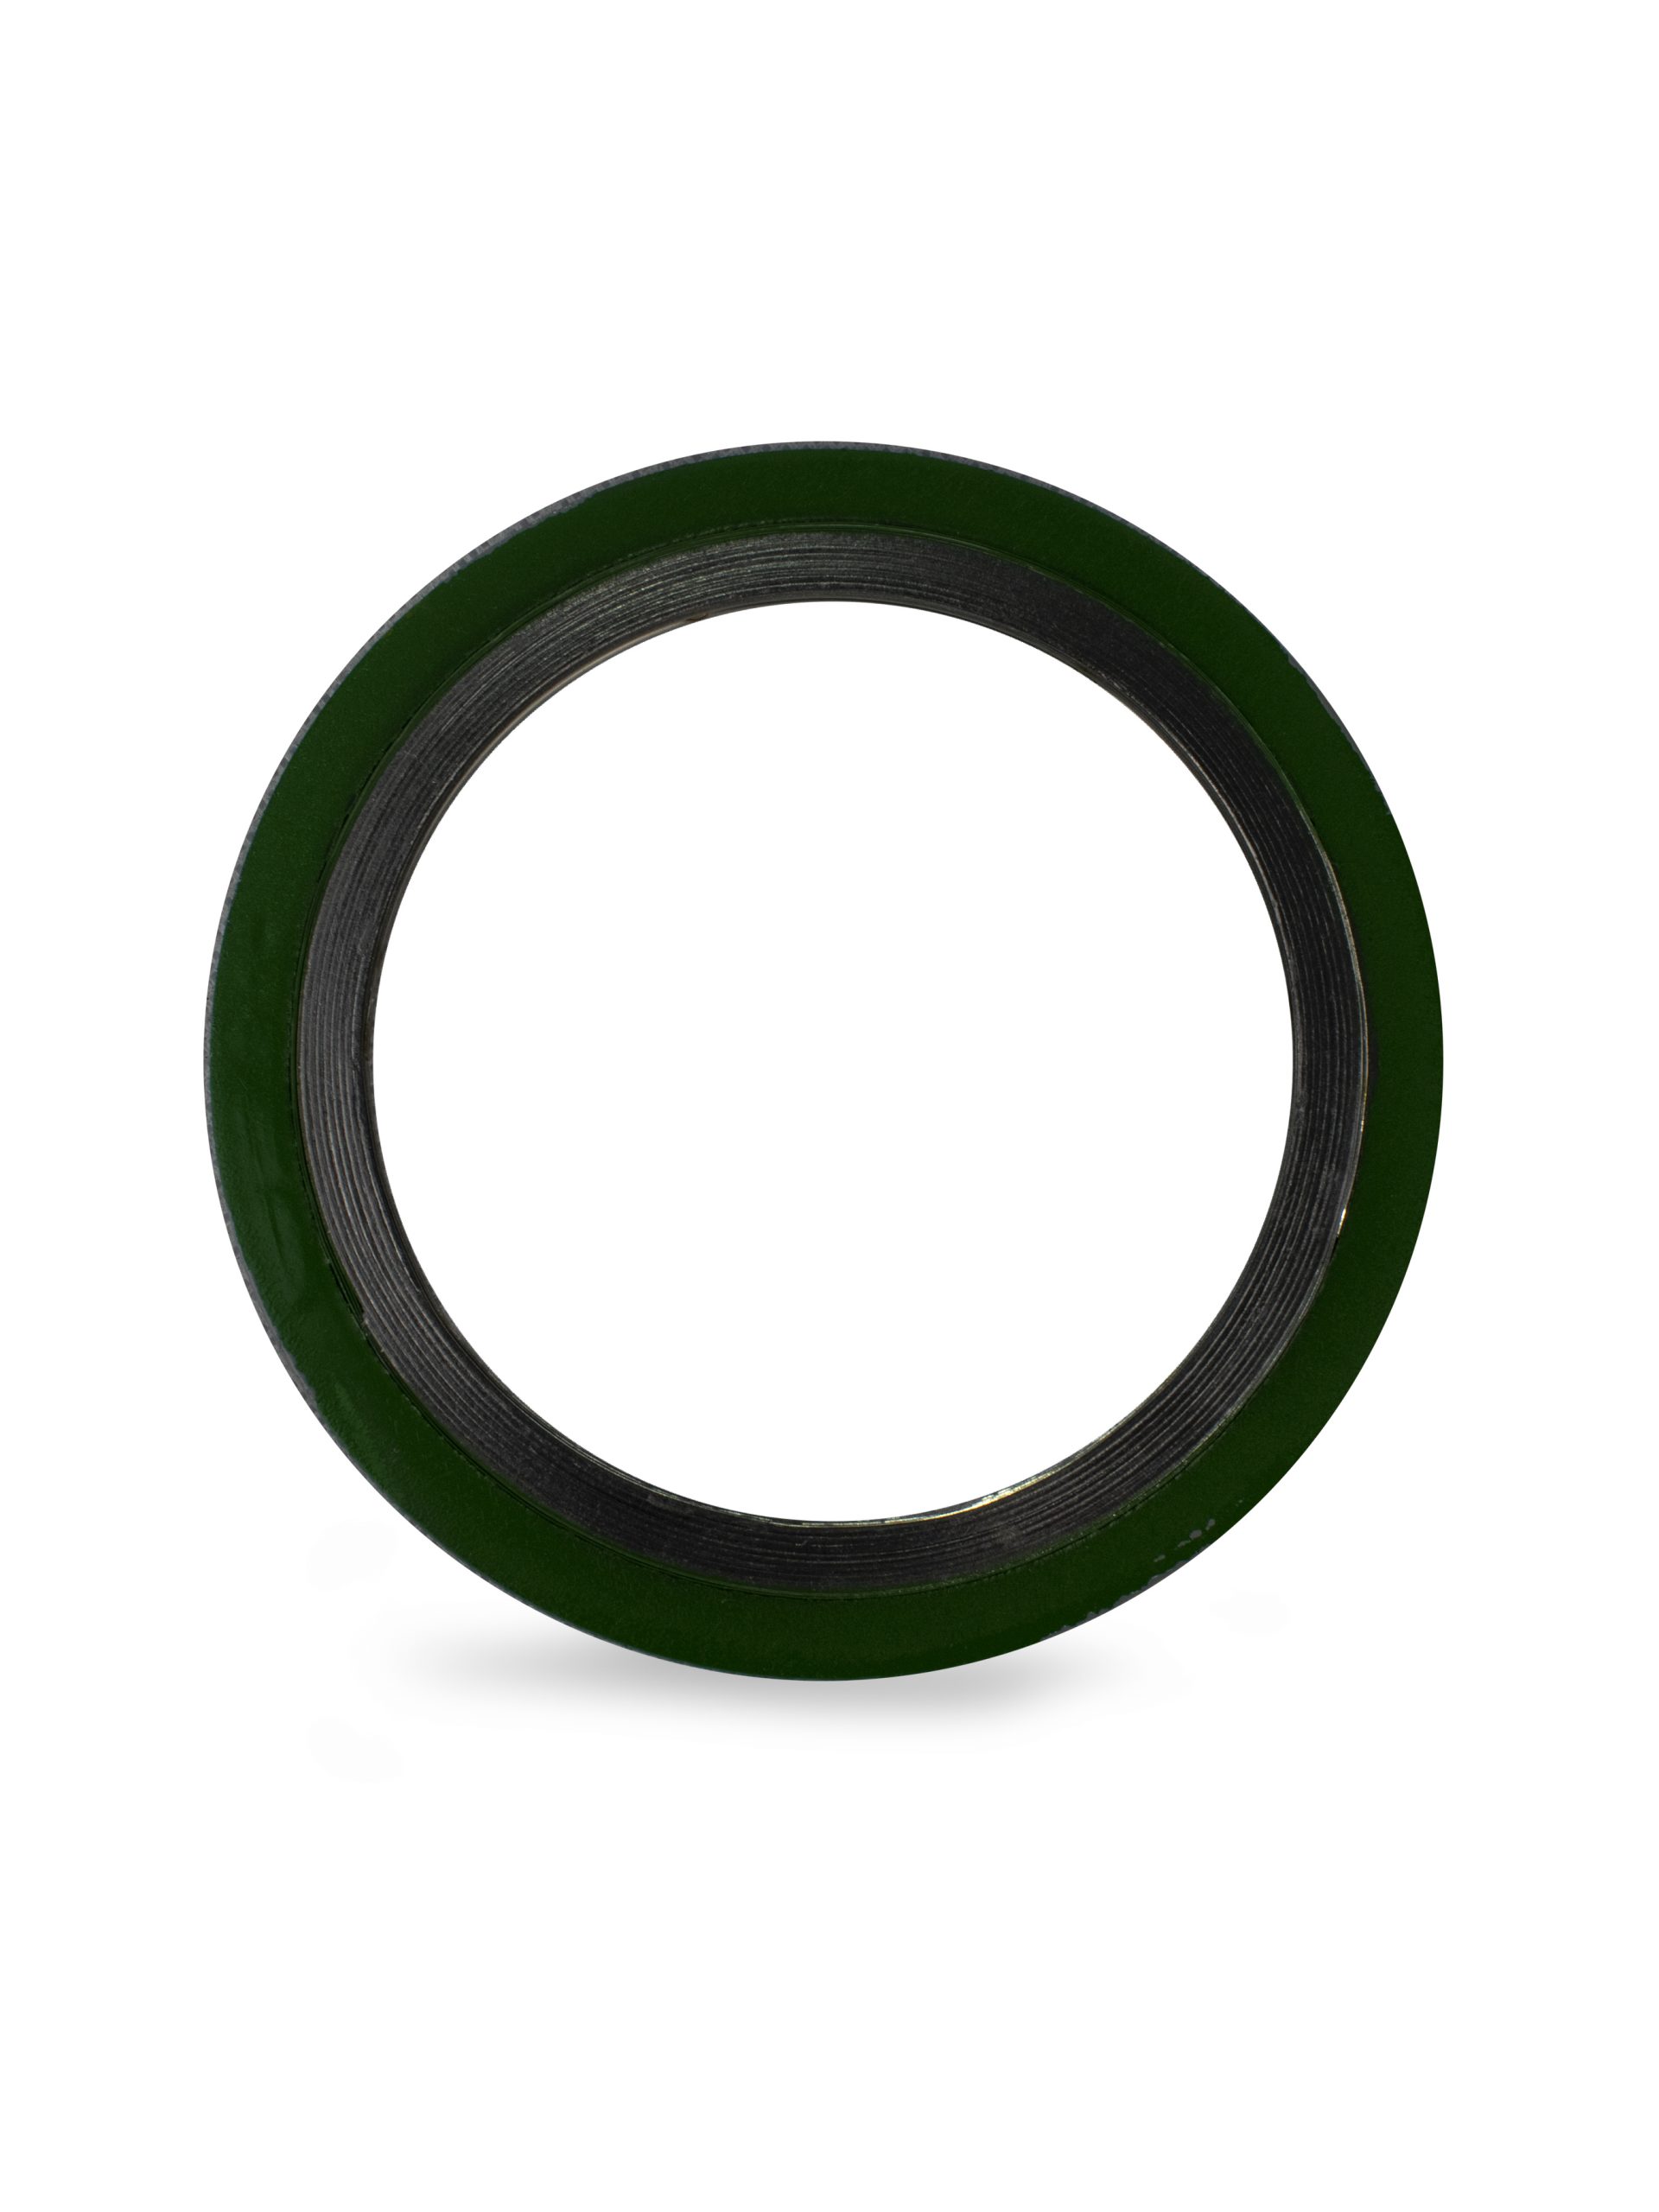 SPIRAL GASKET 3 Inches CLASS 150 SS 316L from Gas Equipment Company Llc Abu Dhabi, UNITED ARAB EMIRATES